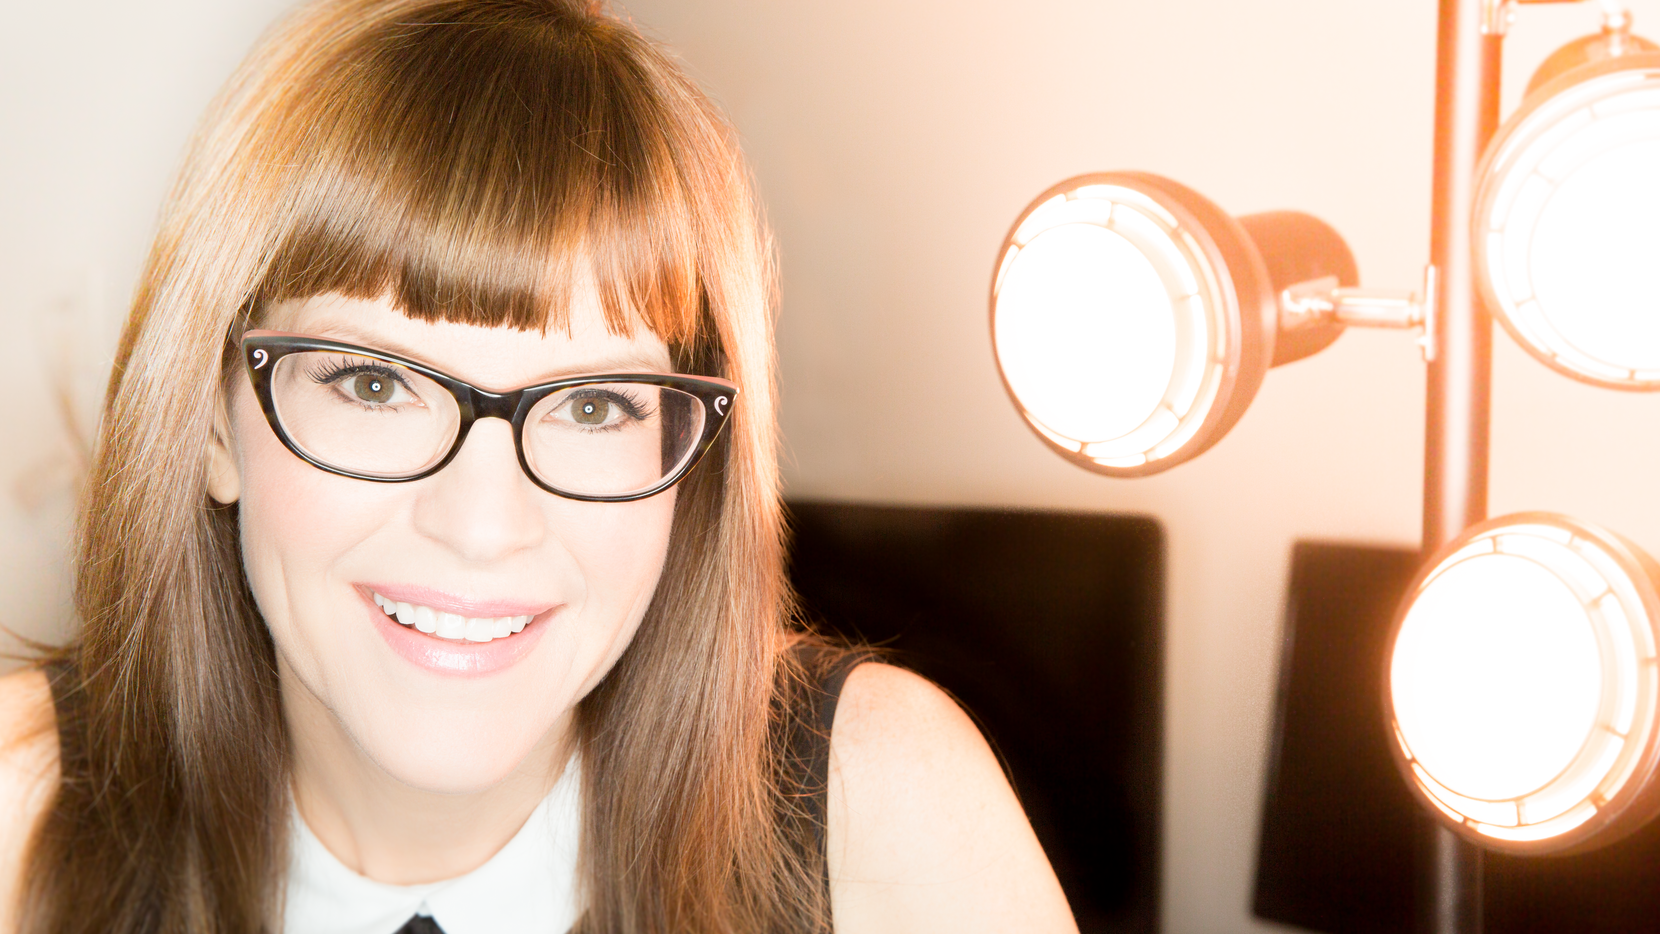 With A New Album Out Feb 28 Lisa Loeb Just Wants To Live In The Moment